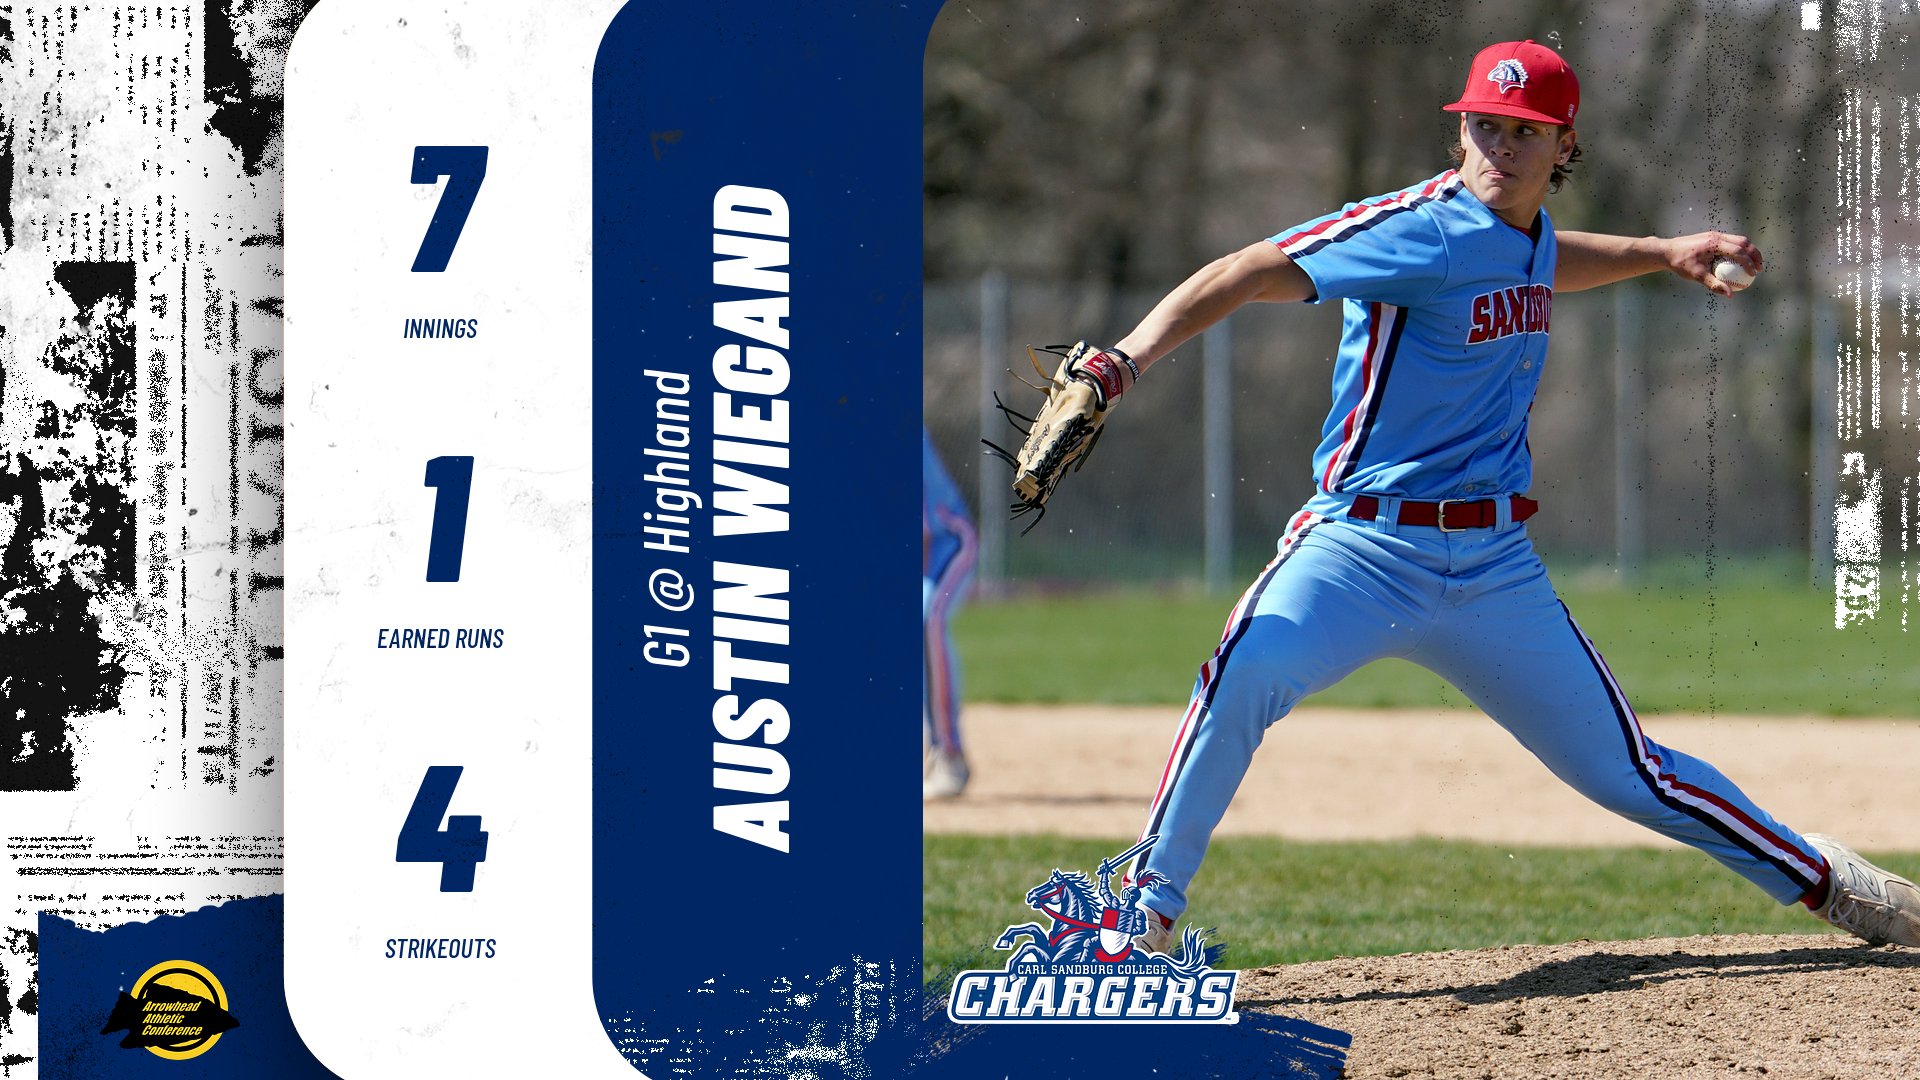 Kelch’s go-ahead HR in extras, Wiegand’s gem send Chargers past Highland in Game 1